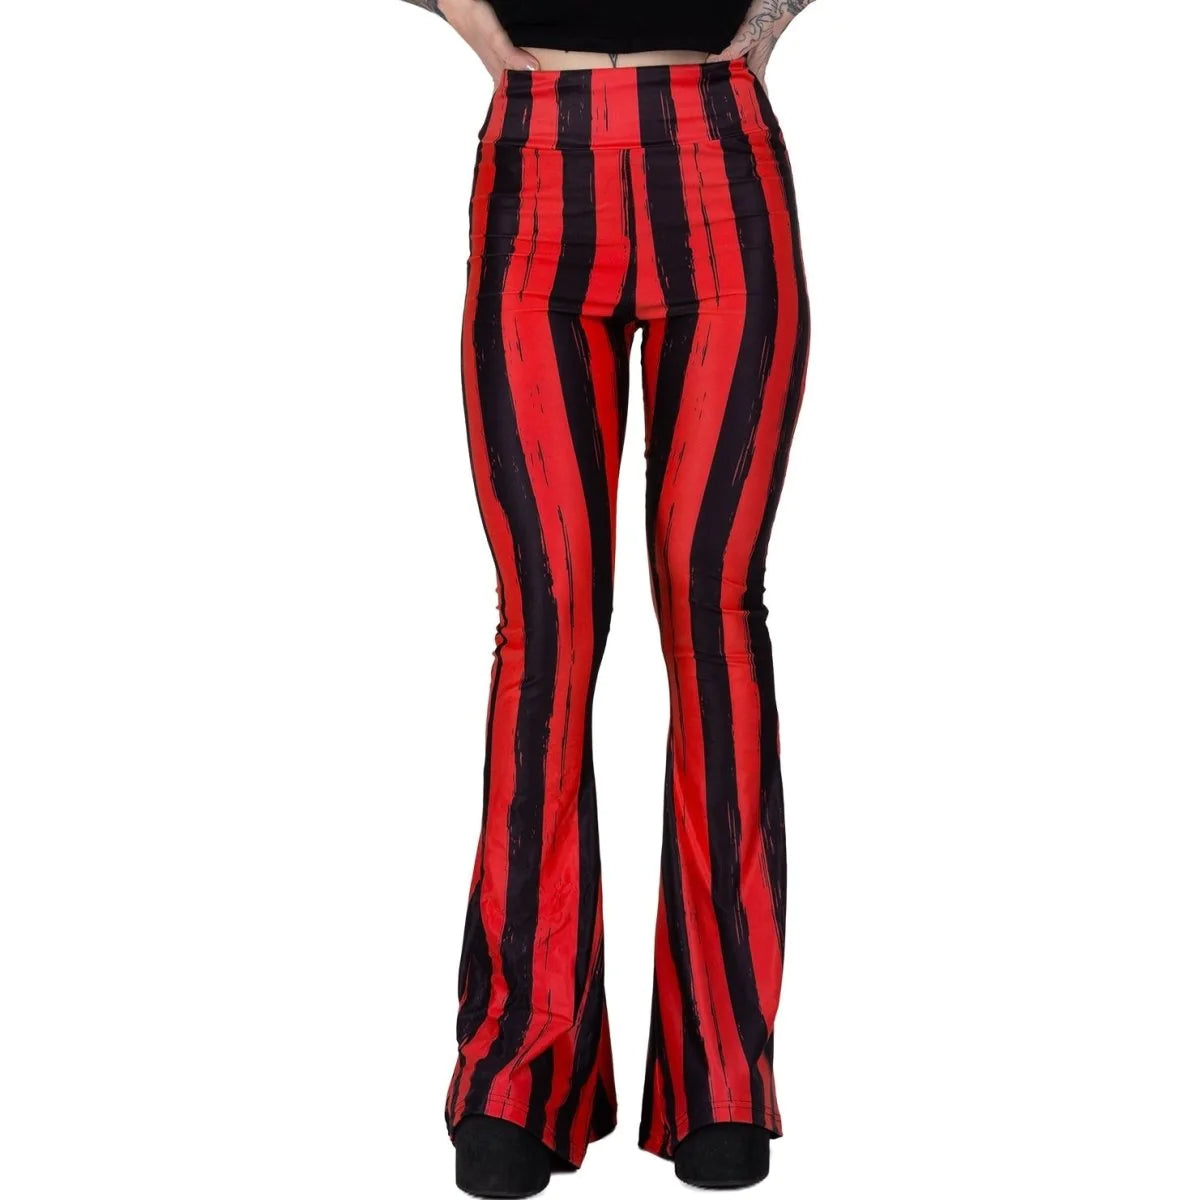 SB.Shellz WOMENS Red-Line Pant Black Heart (All Over Red Stitch